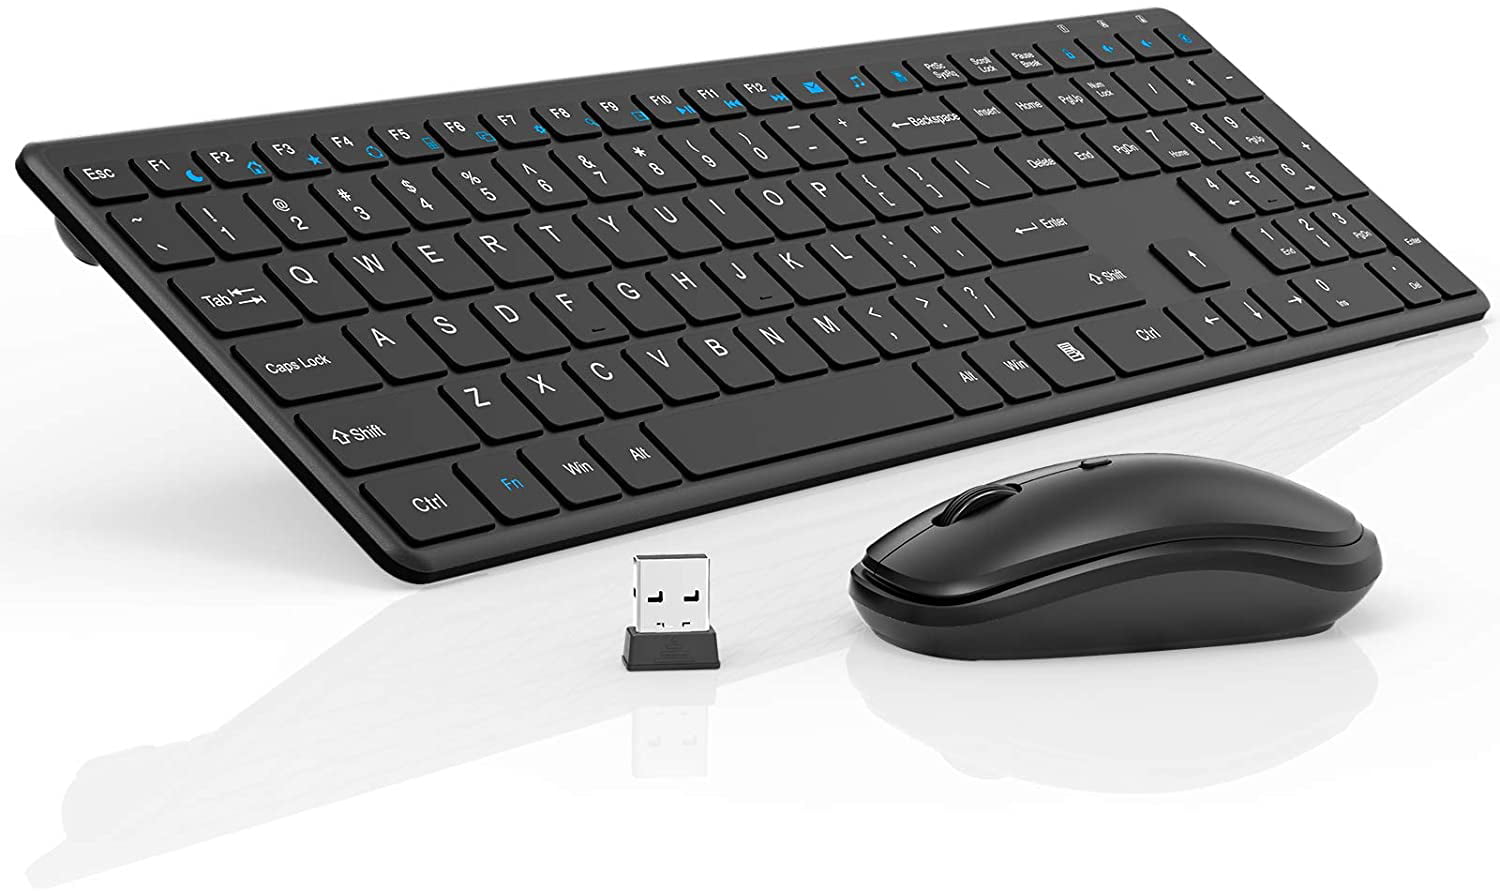 Black Wireless Keyboard Mouse Combo 2.4GHz Slim Full Size Wireless Keyboard and Mouse Set with Number Pad and Nano Receiver for PC Laptop Windows Quiet and Ergonomic